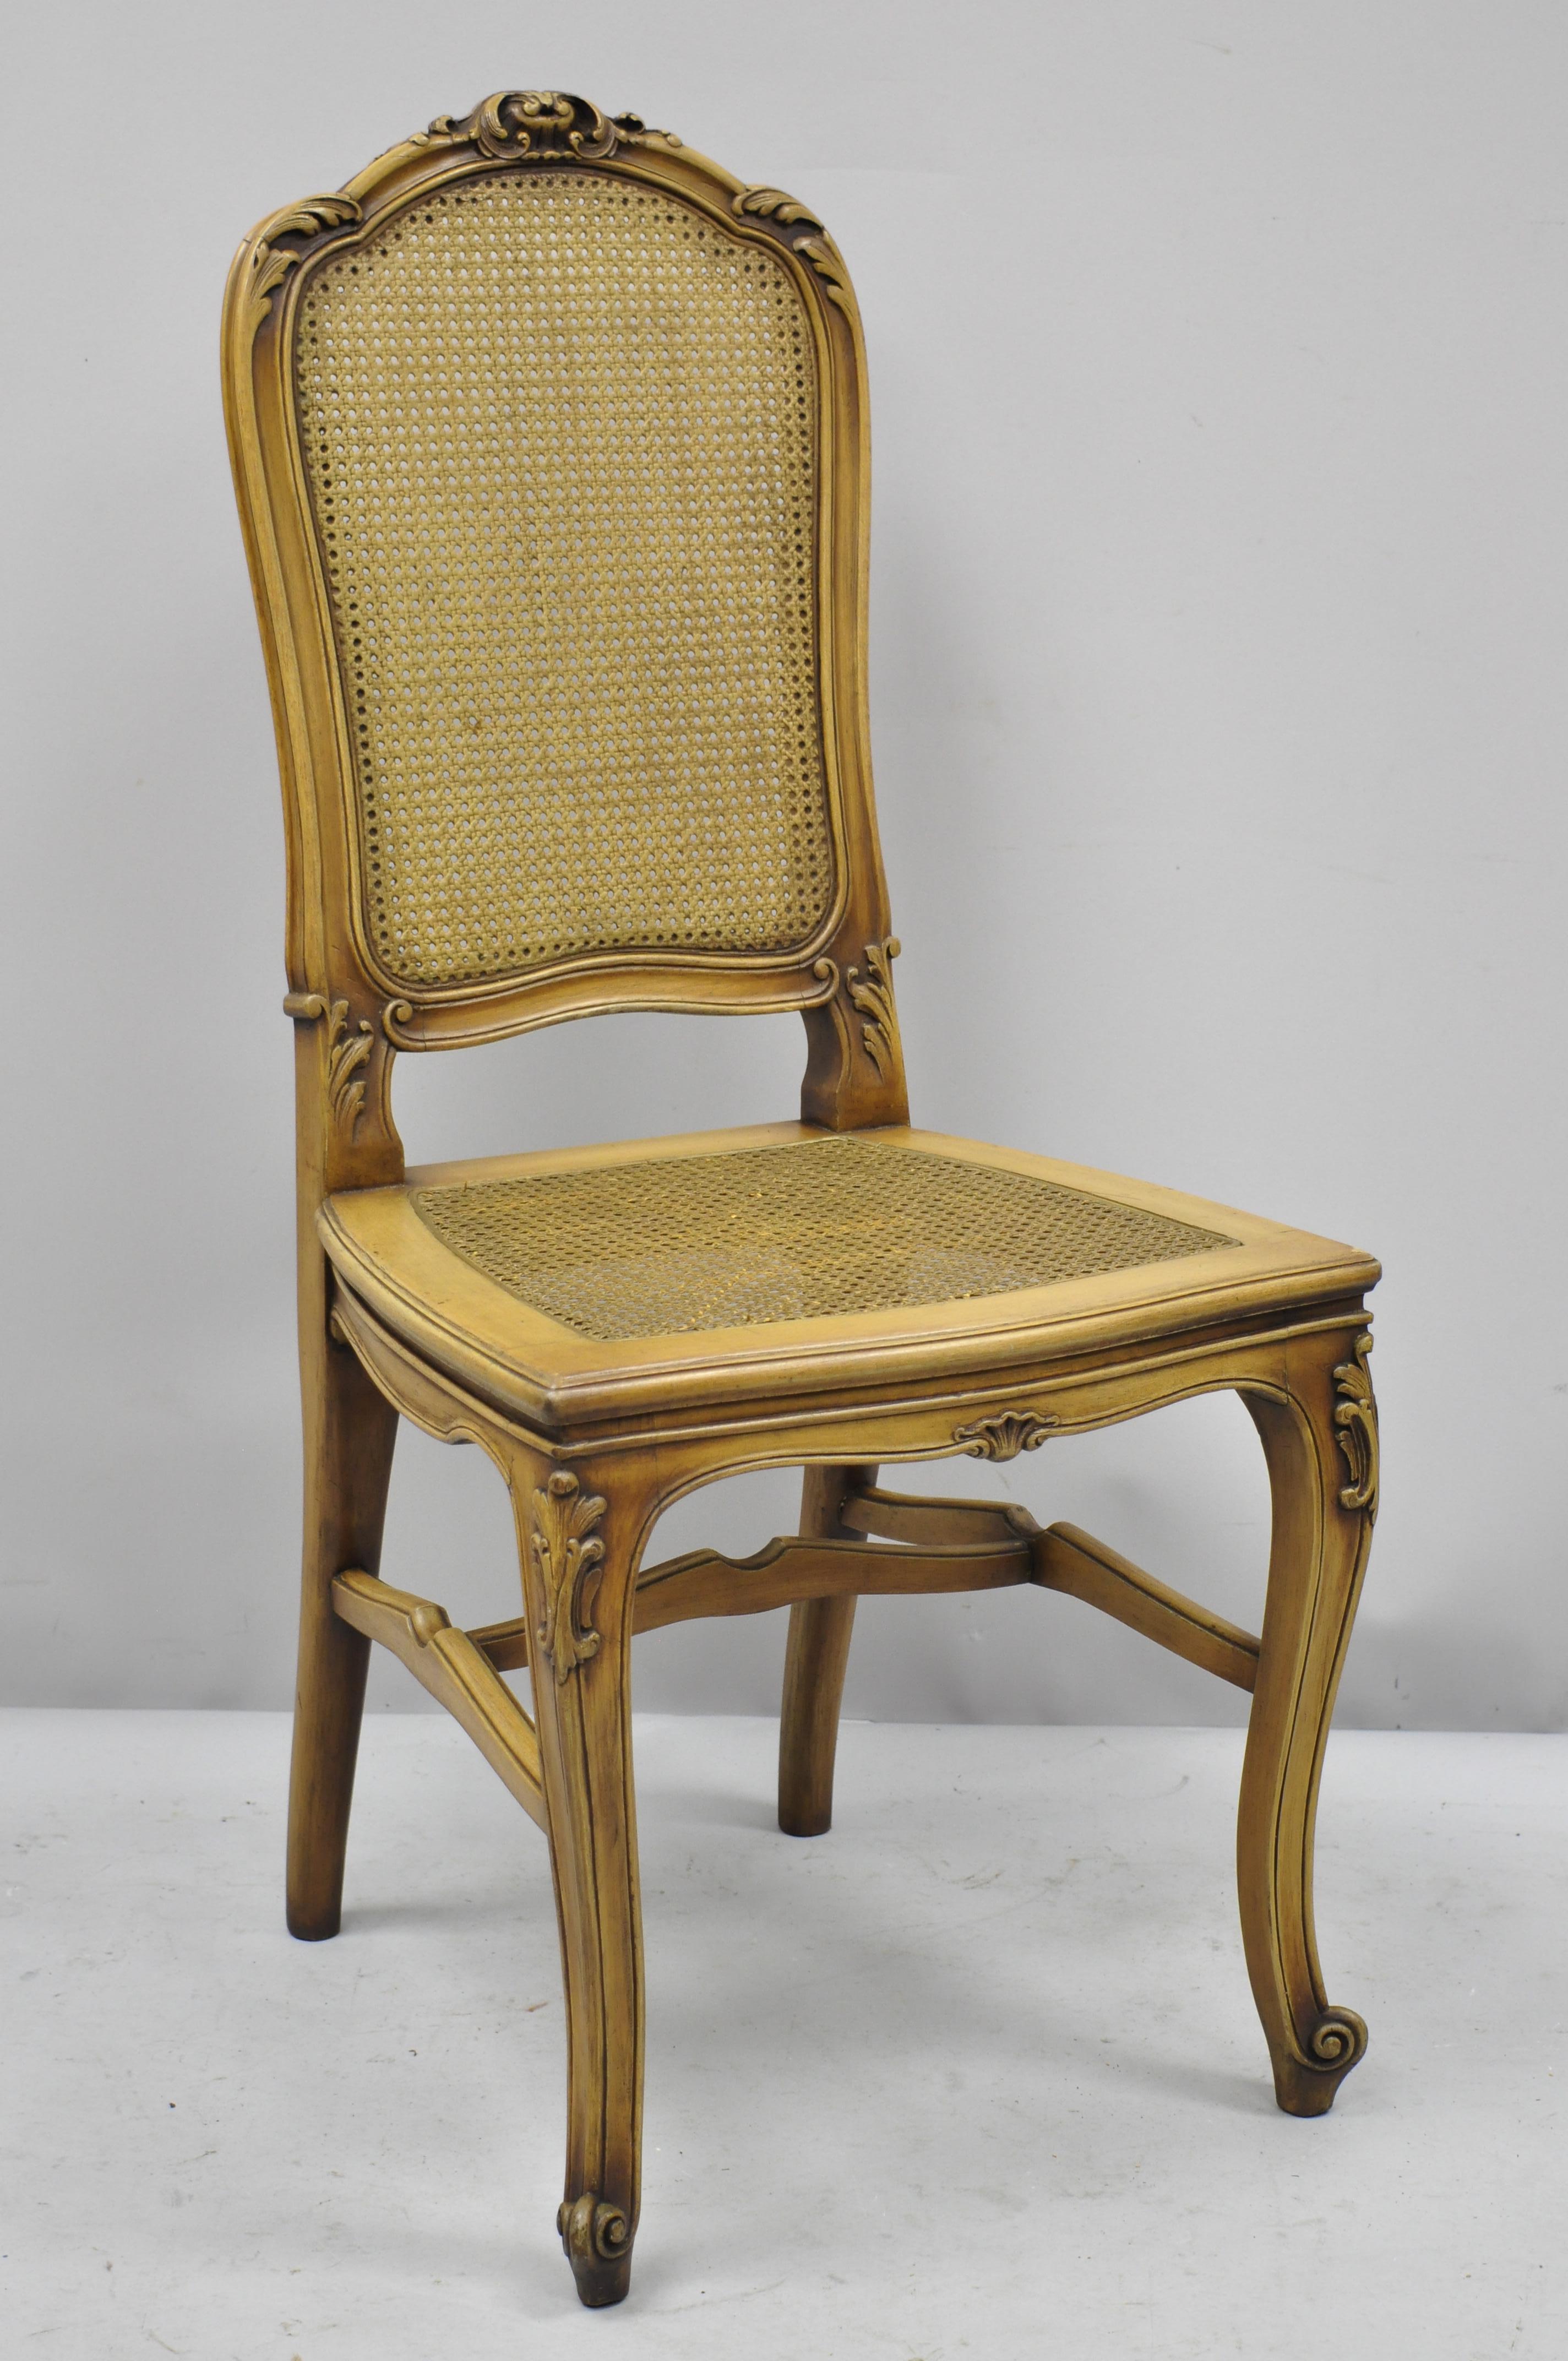 4 antique French Provincial Louis XV style carved walnut and cane dining chairs. Listing features cane back and seat, carved stretcher, solid wood construction, beautiful wood grain, finely carved details, cabriole legs, very nice antique item,